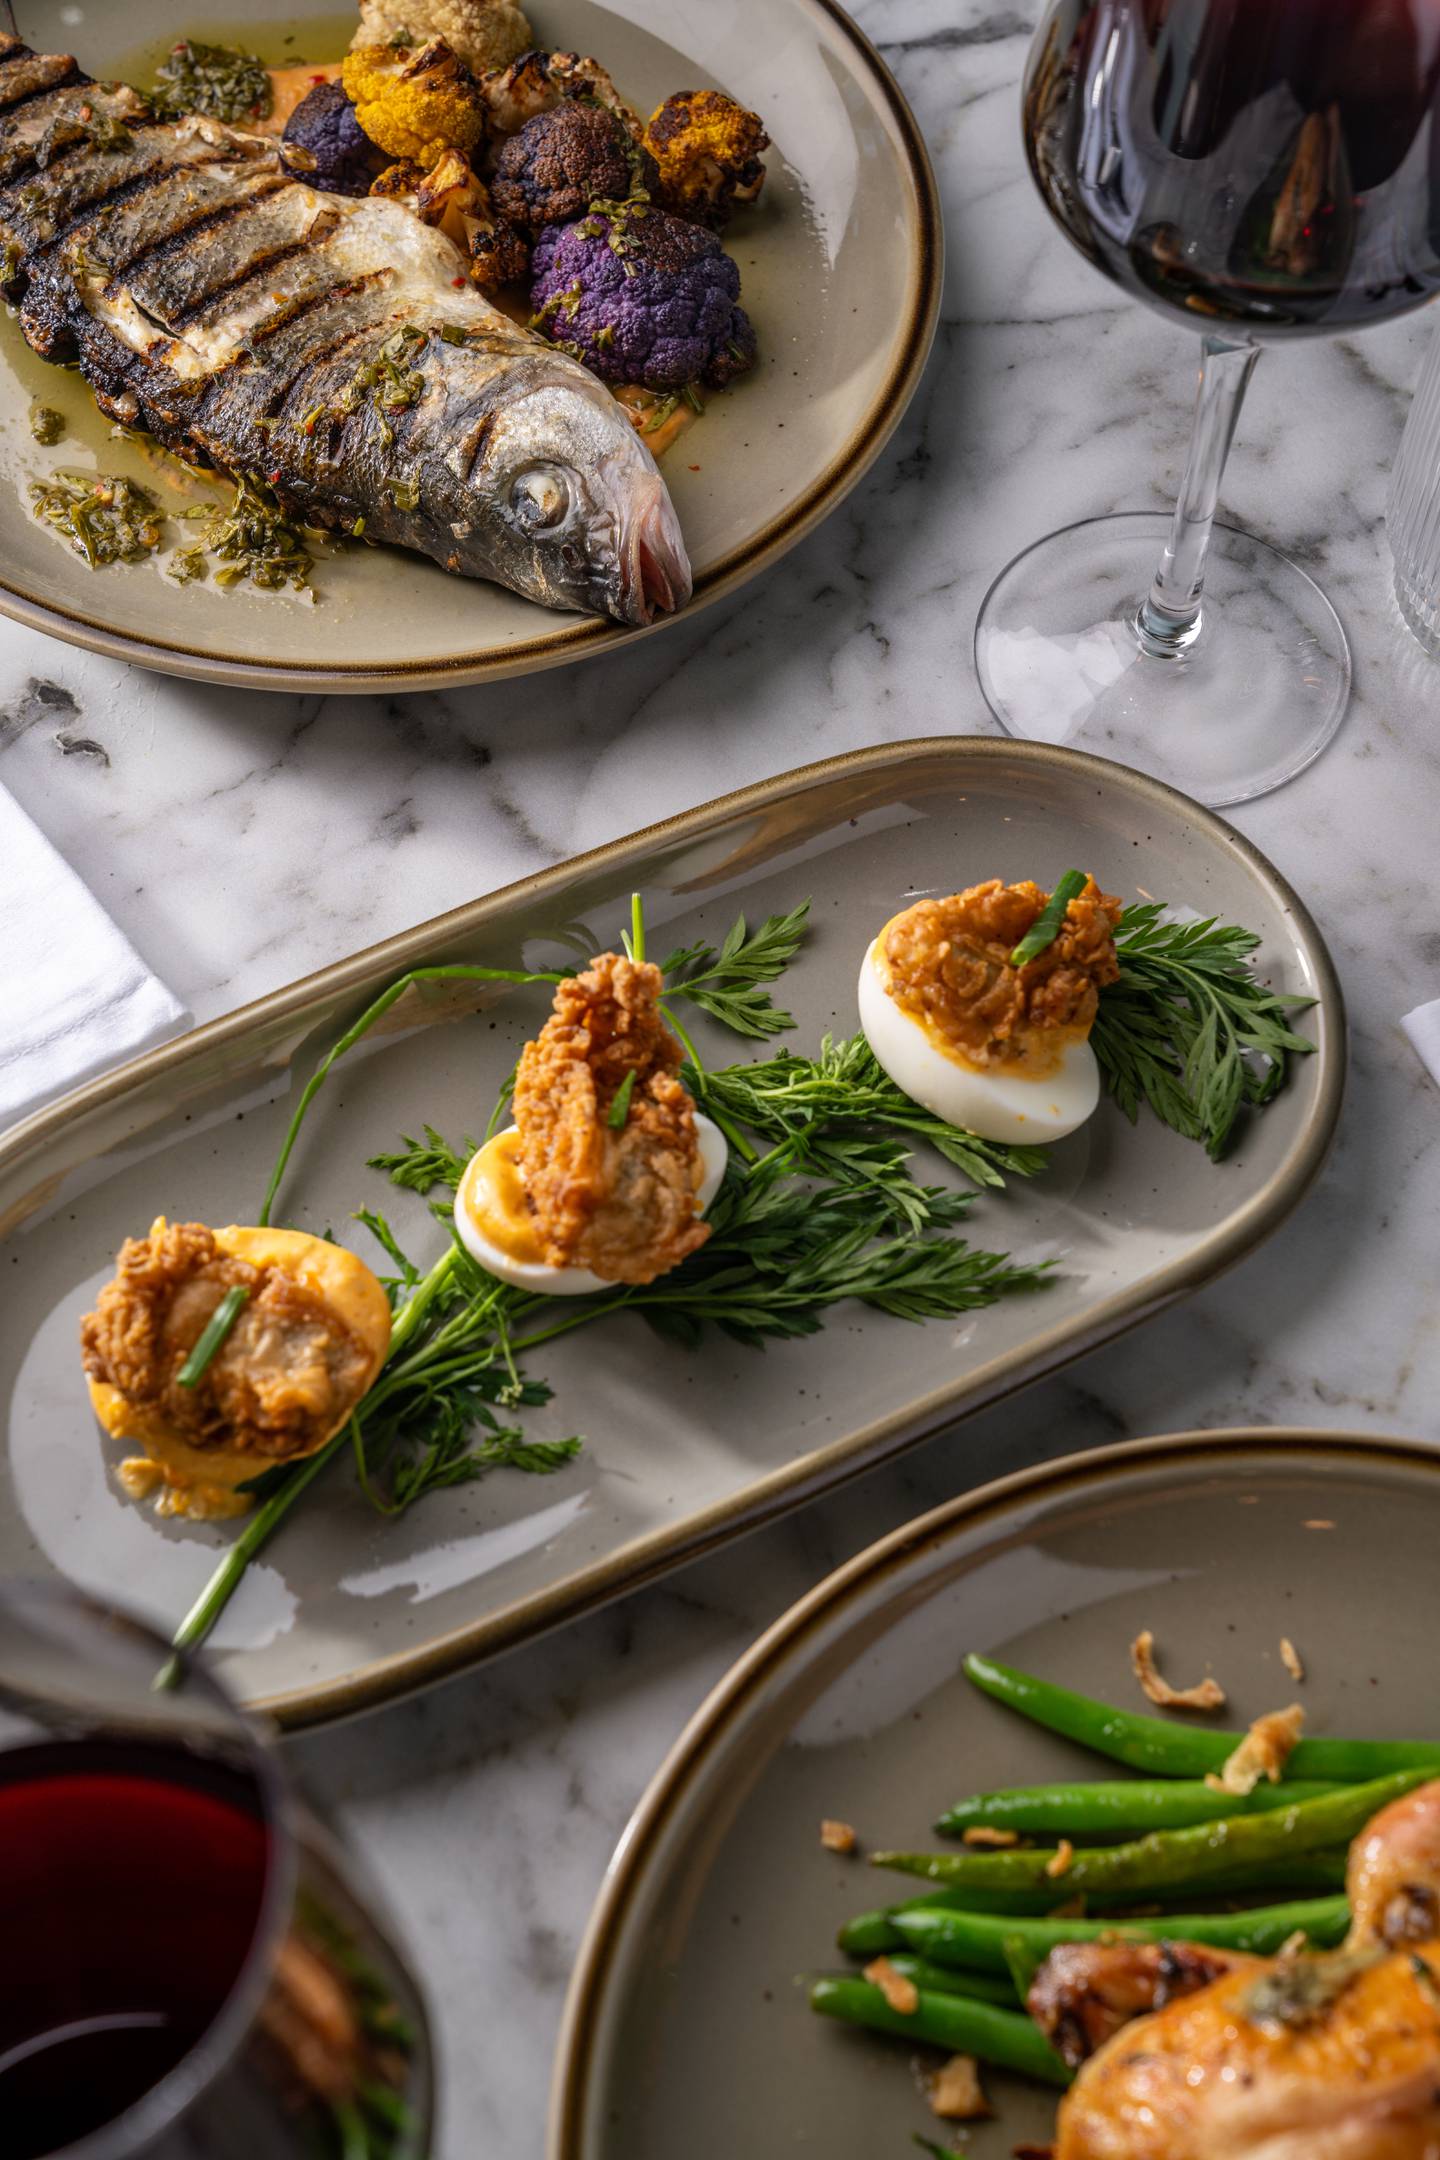 In their new location, The Urban Oyster will offer an array of foods from lobster cavatelli to oysters and deviled eggs.